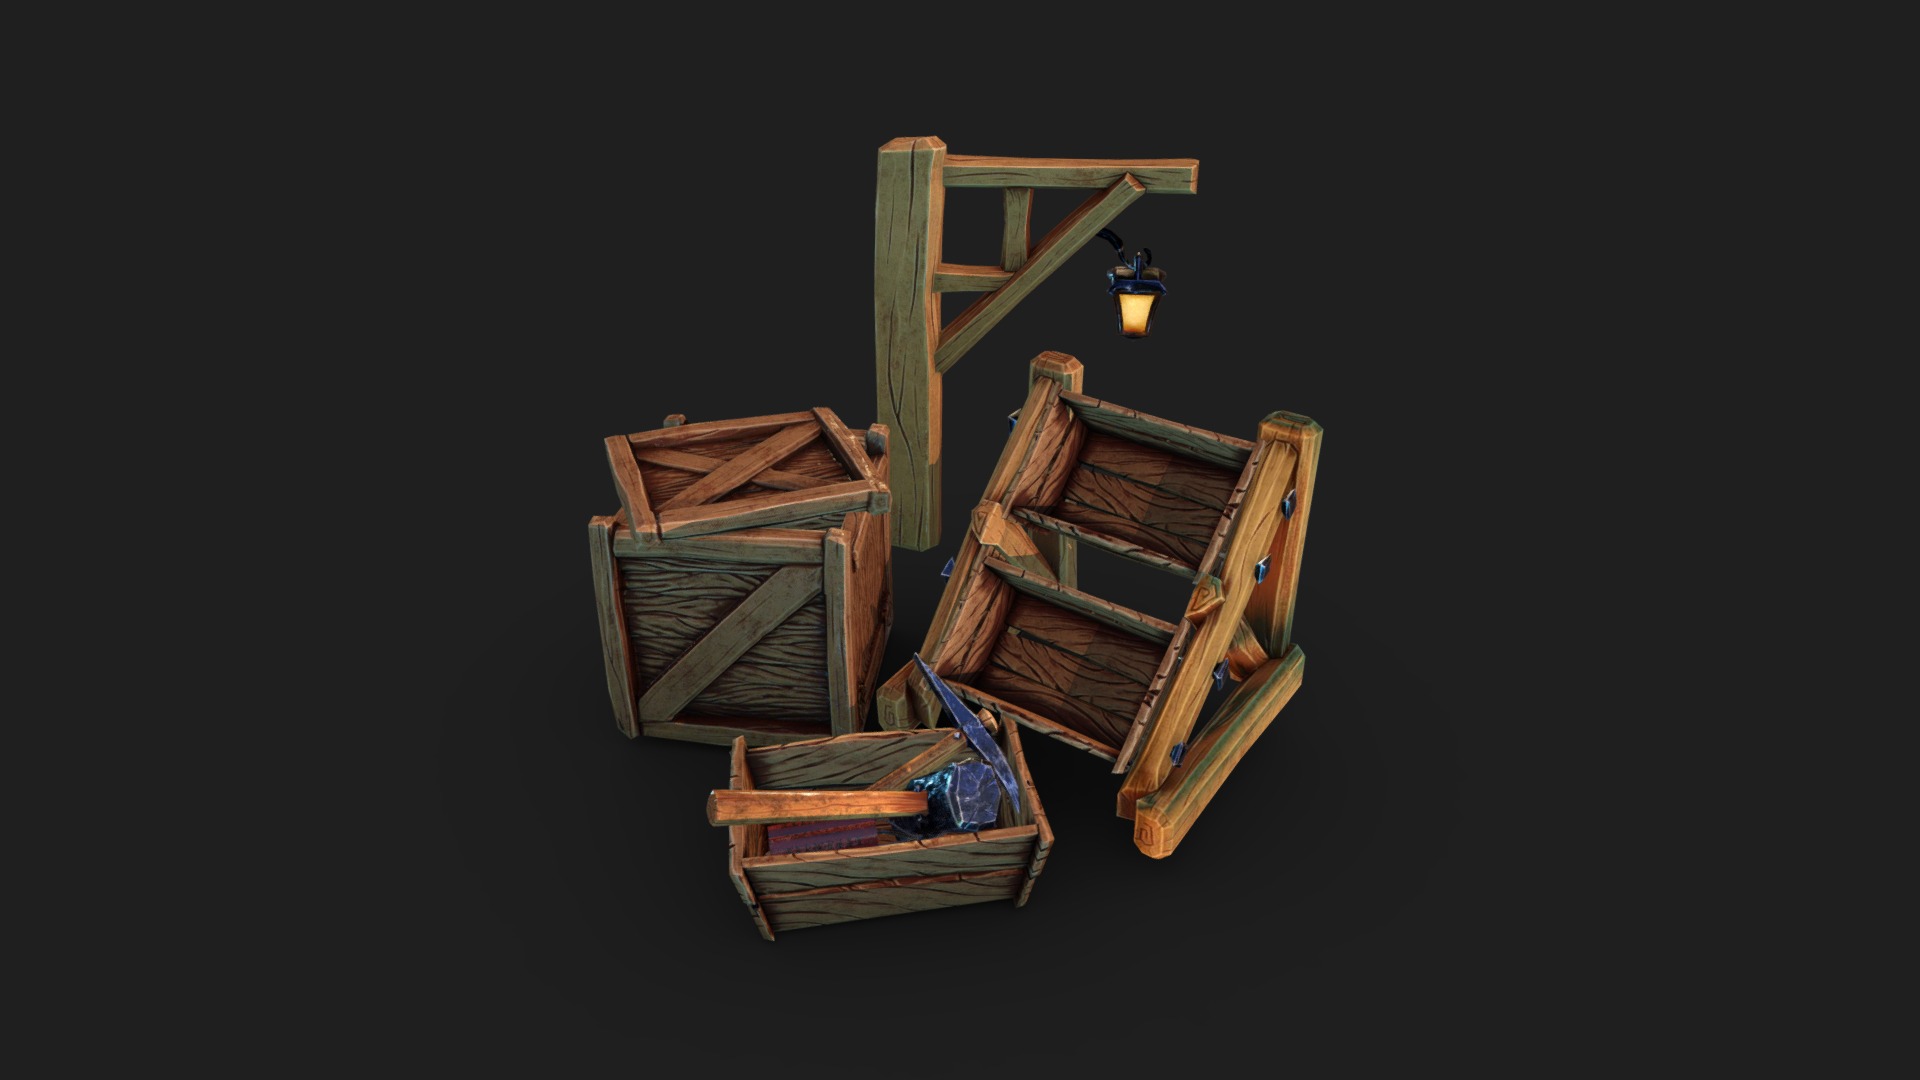 3D model Mining Tools - This is a 3D model of the Mining Tools. The 3D model is about a wooden house with a light on top.